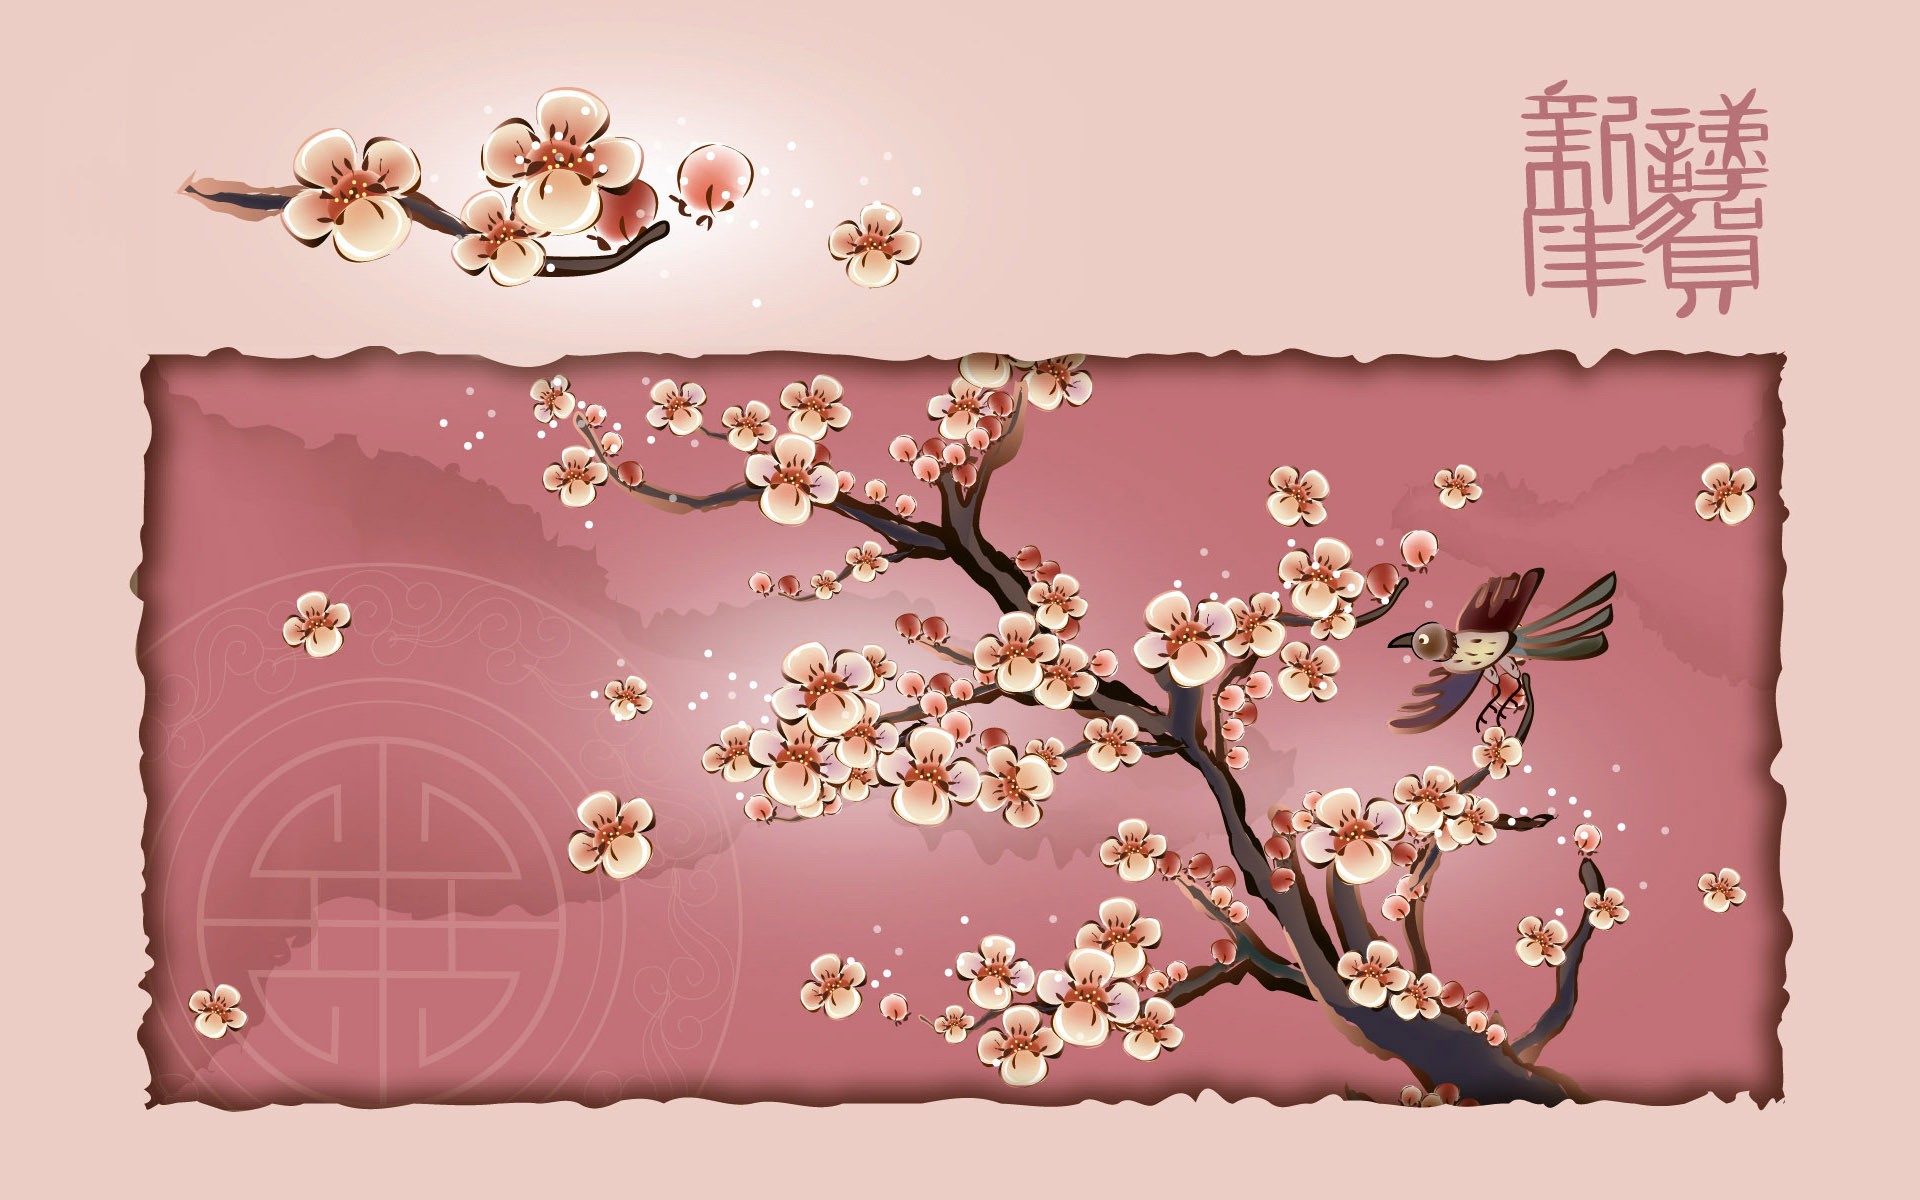 artistic oriental wallpapers wallpaper images 1920x1200 1920x1200